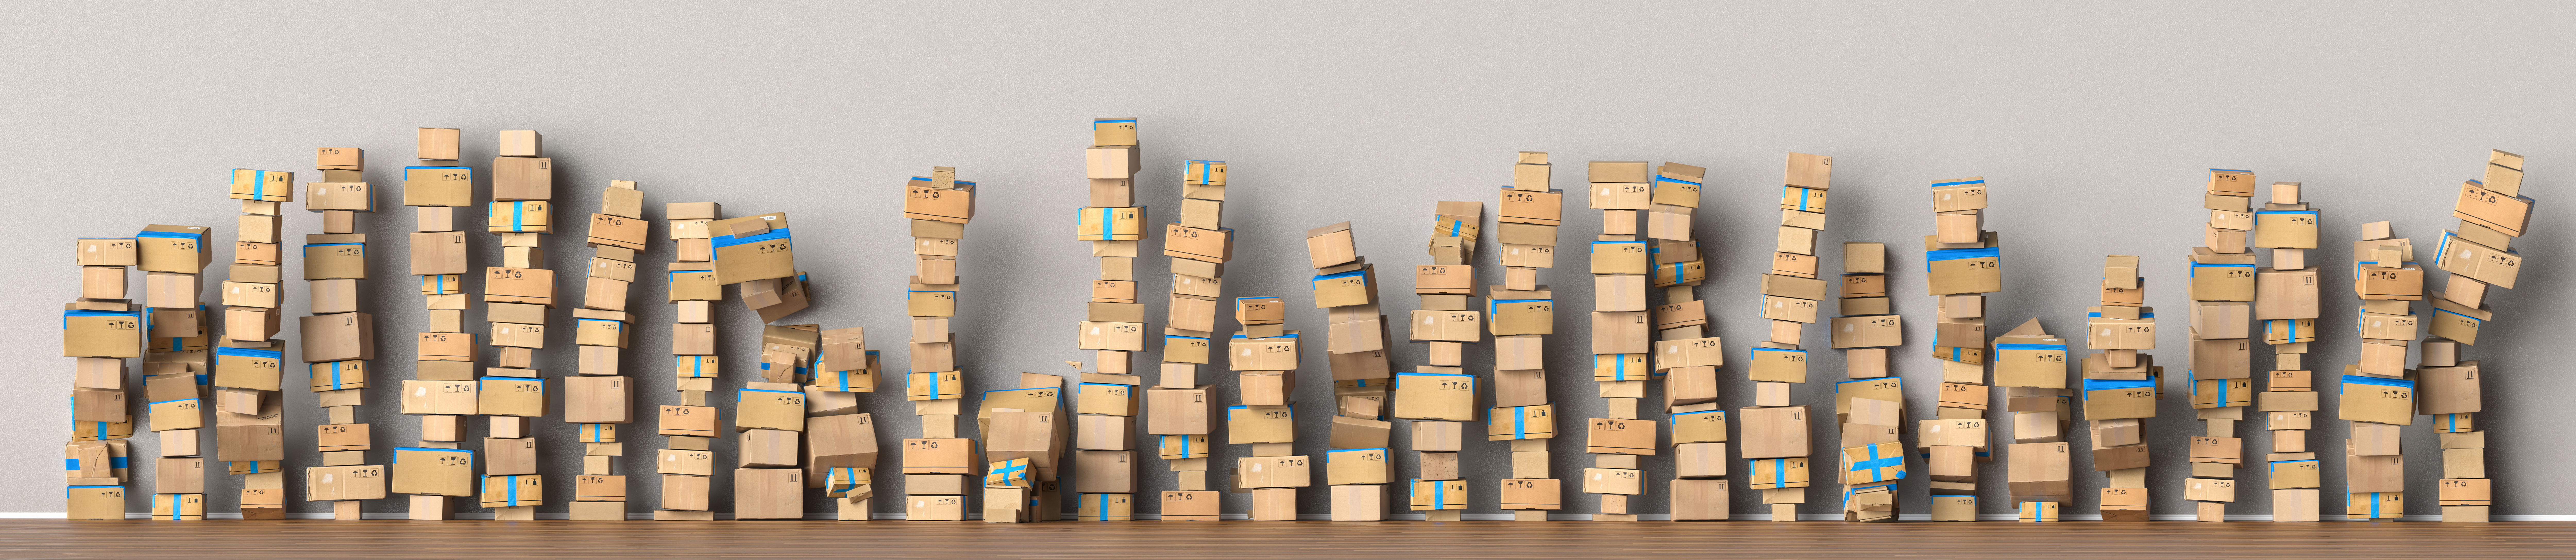 Returns are one of the biggest issues in e-commerce logistics, incurring time and cost penalties if not effectively dealt with. (shutterstock_1663645921)